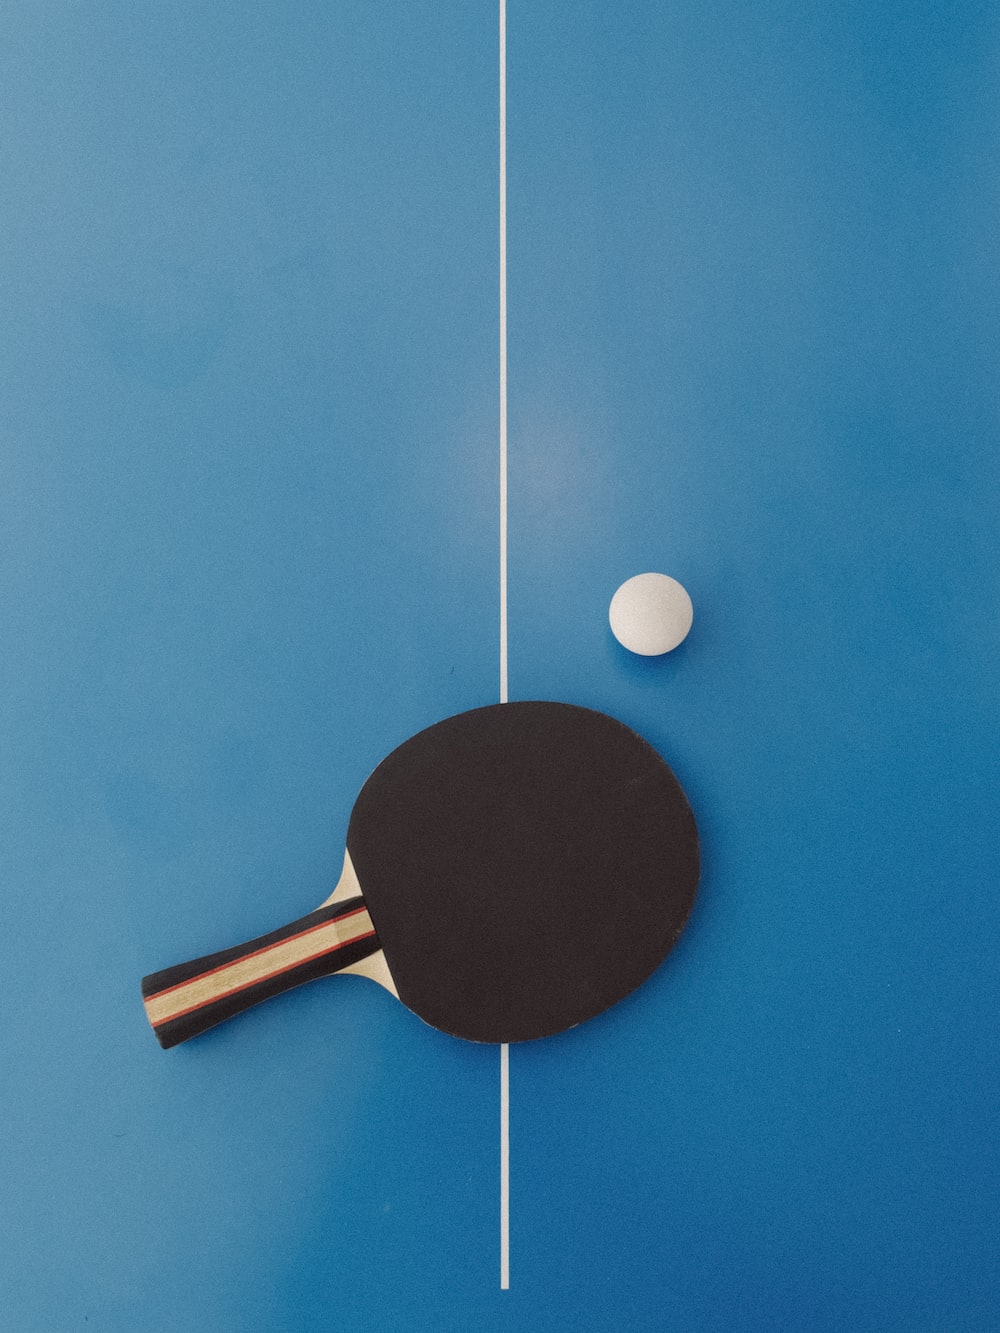 K table tennis pictures download free images on